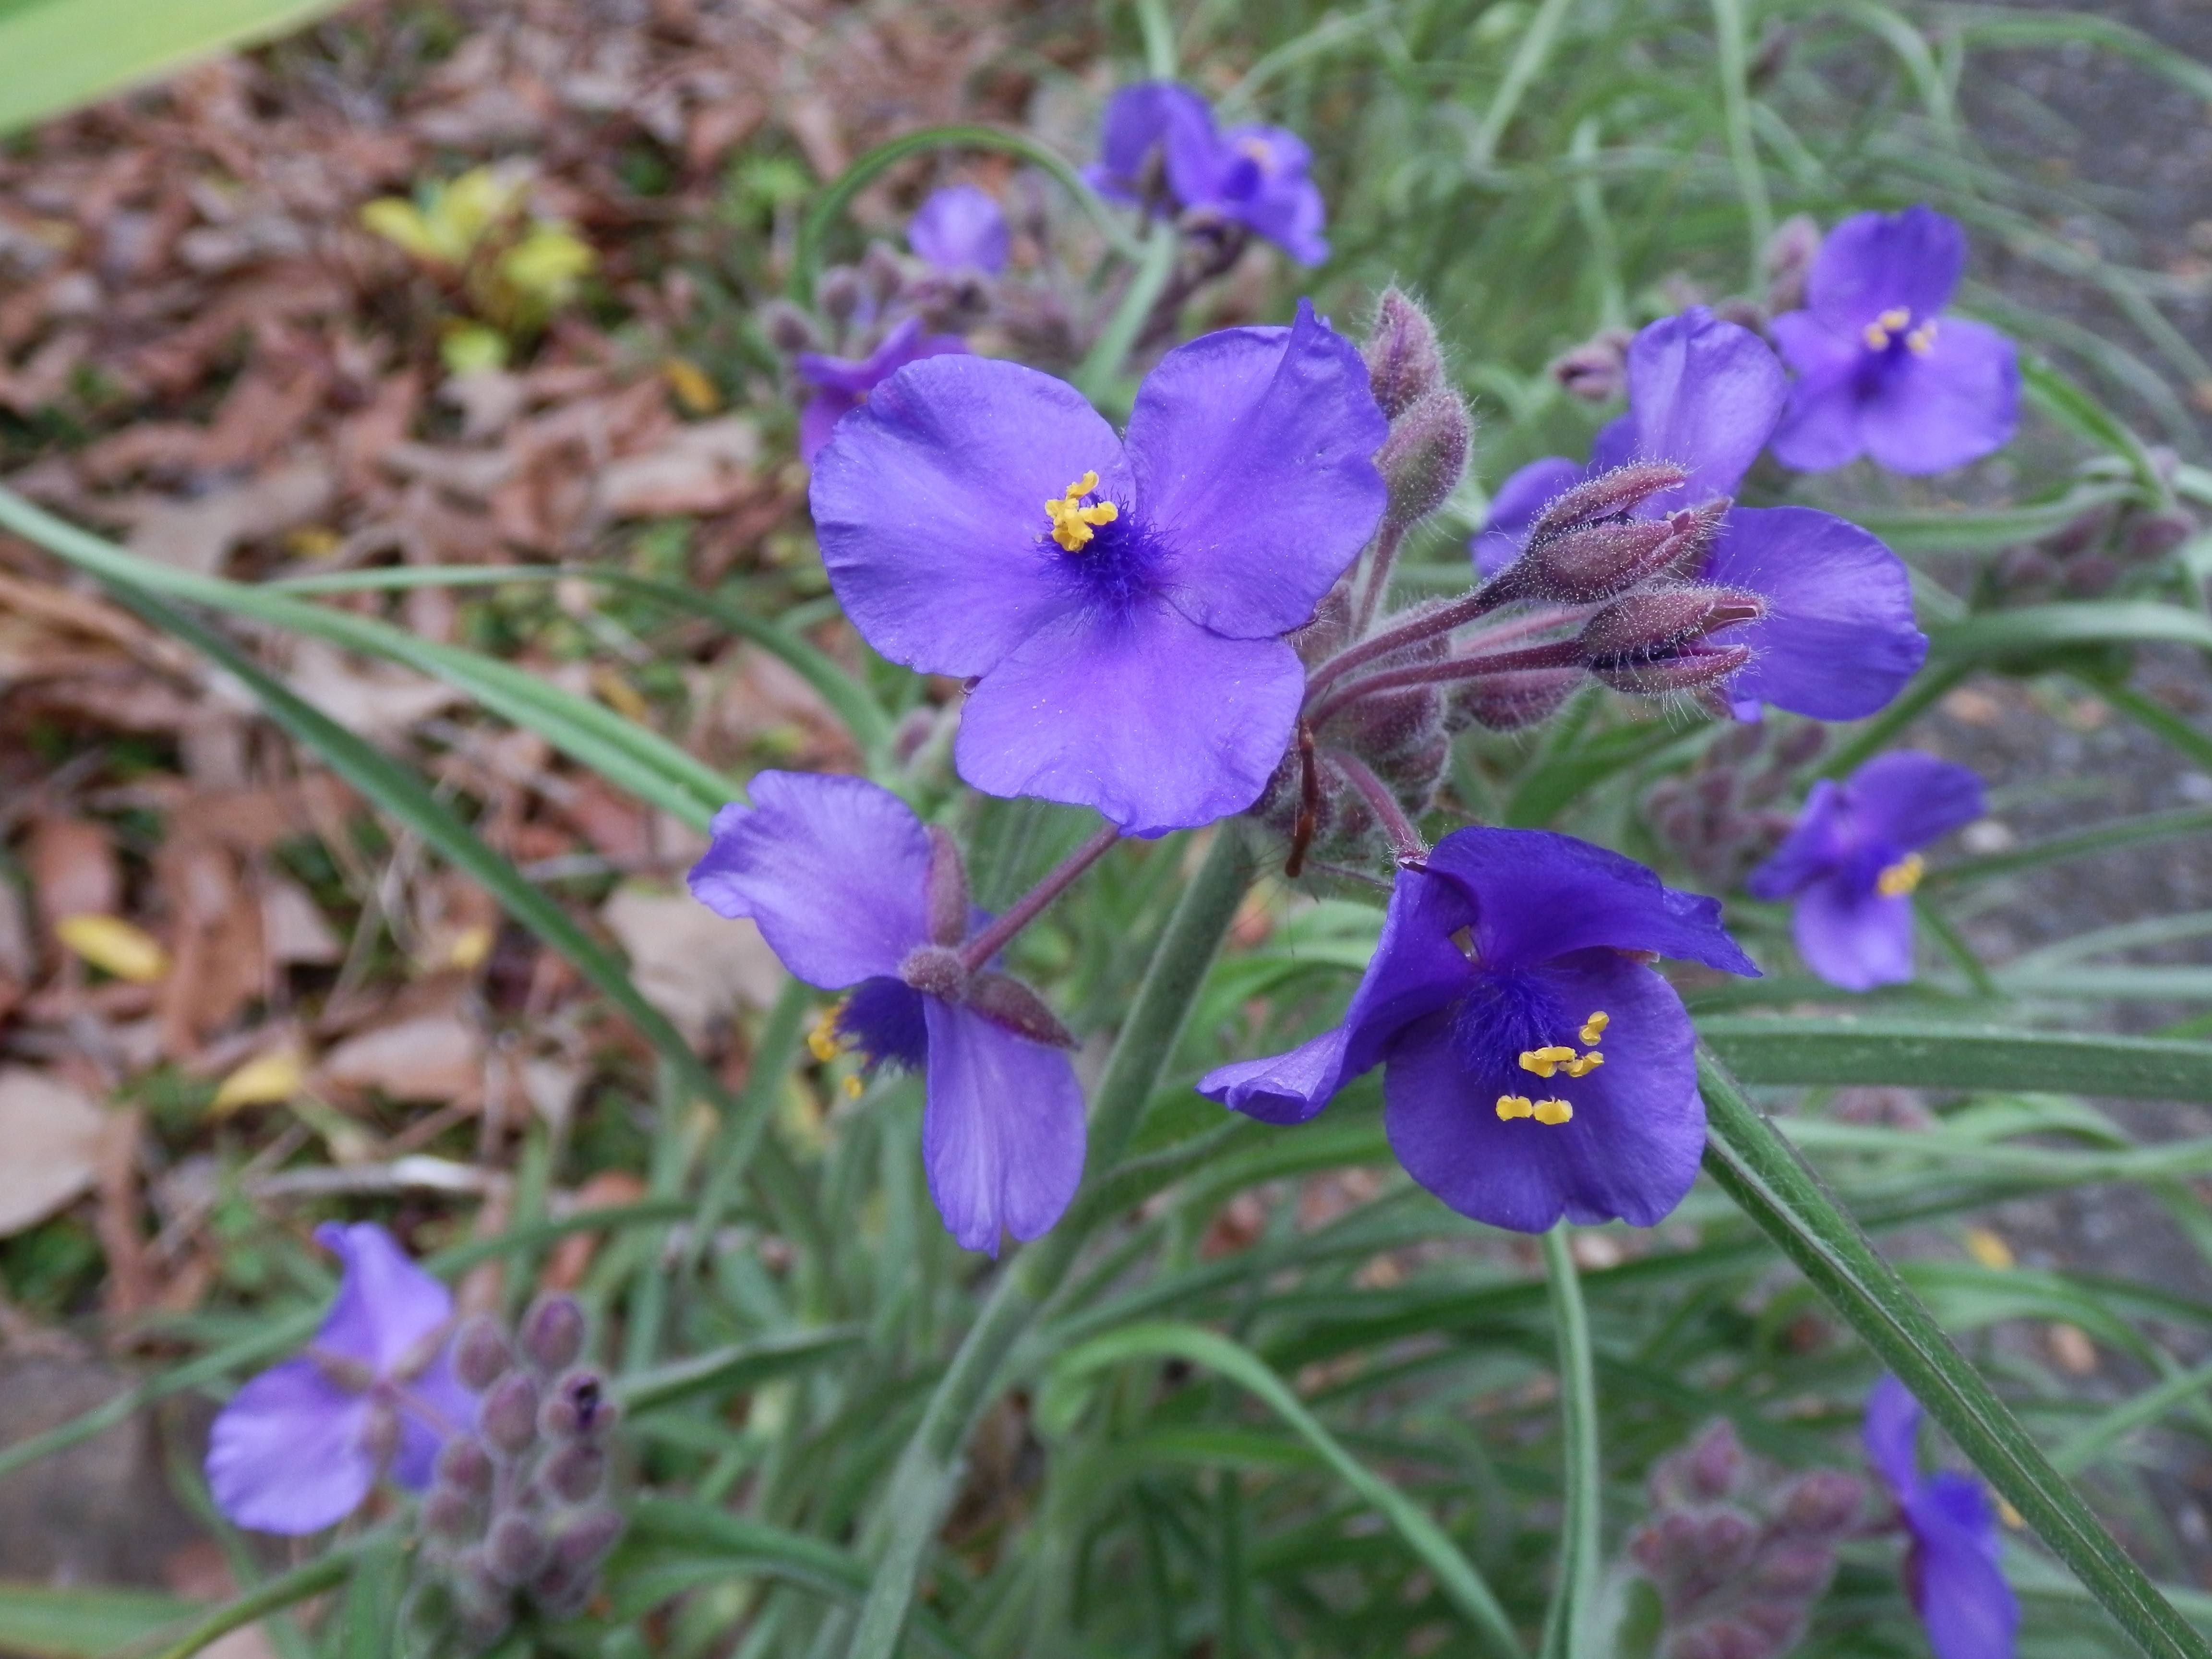 The Scientific Name is Tradescantia hirsuticaulis. You will likely hear them called Hairy Spiderwort, Hairystem Spiderwort. This picture shows the Has notable hairy leaves and stems. of Tradescantia hirsuticaulis